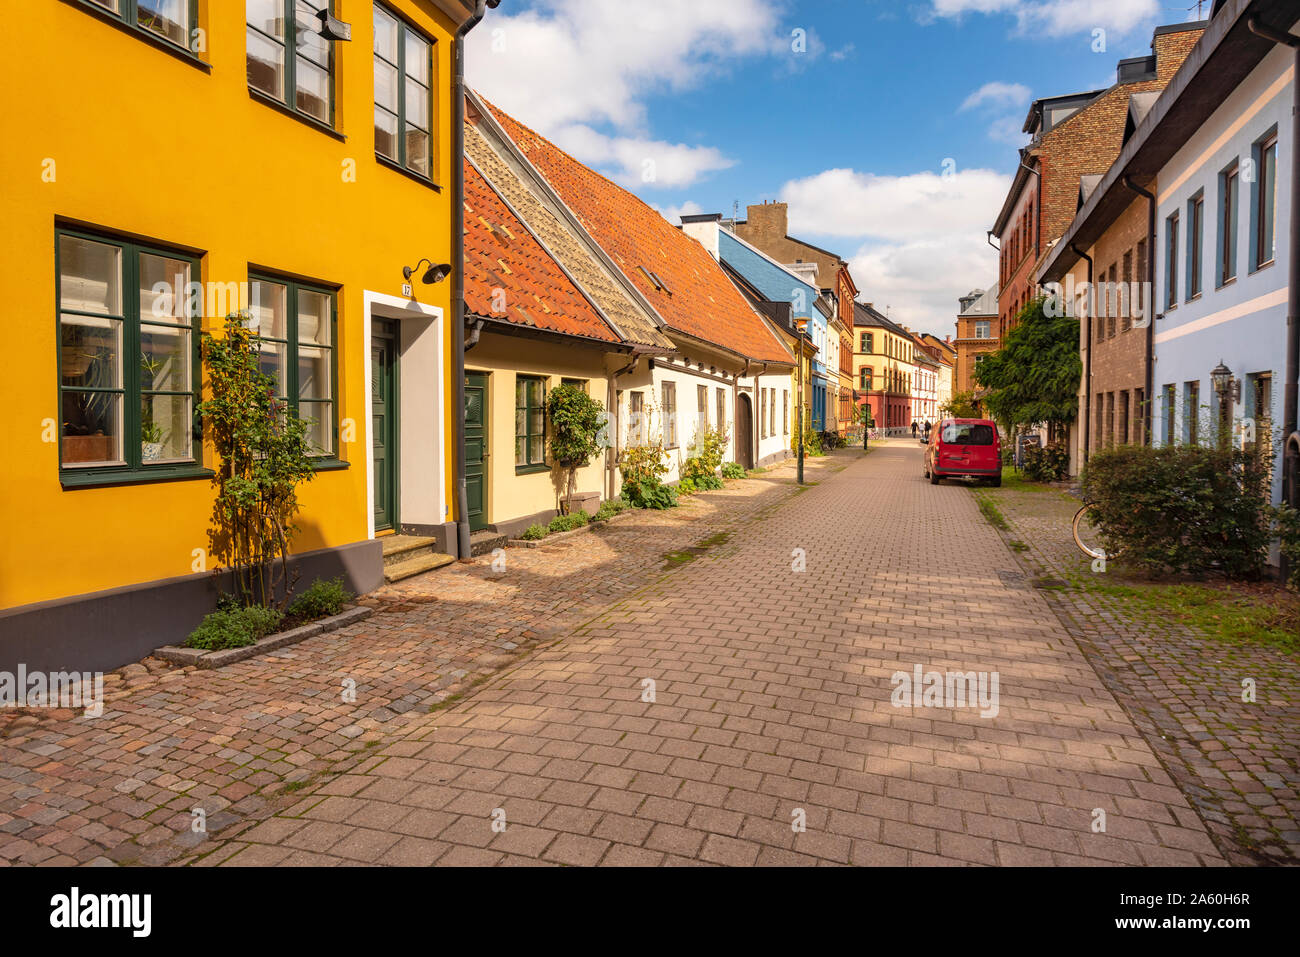 Street amidst residential buildings in Malmo, Sweden Stock Photo